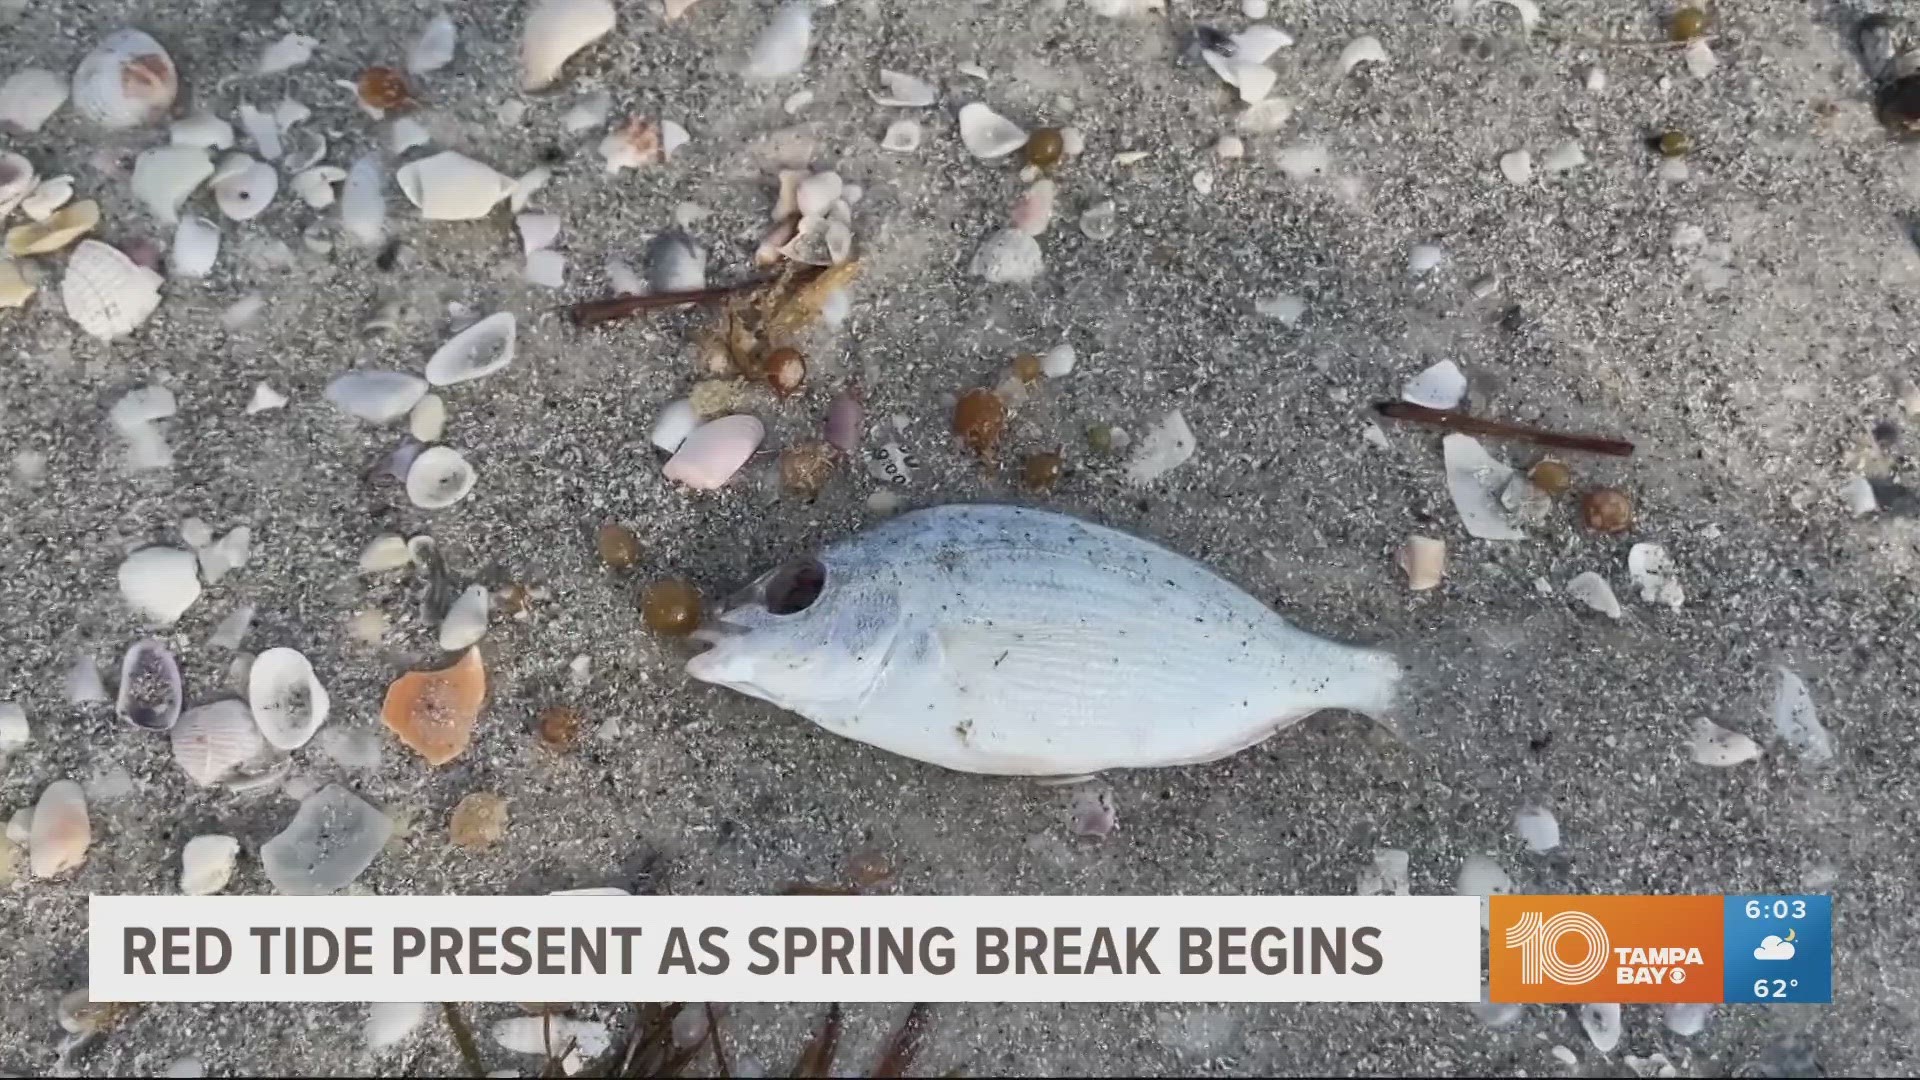 Roughly three tons of dead fish and marine life have been removed from Indian Rocks Beach.